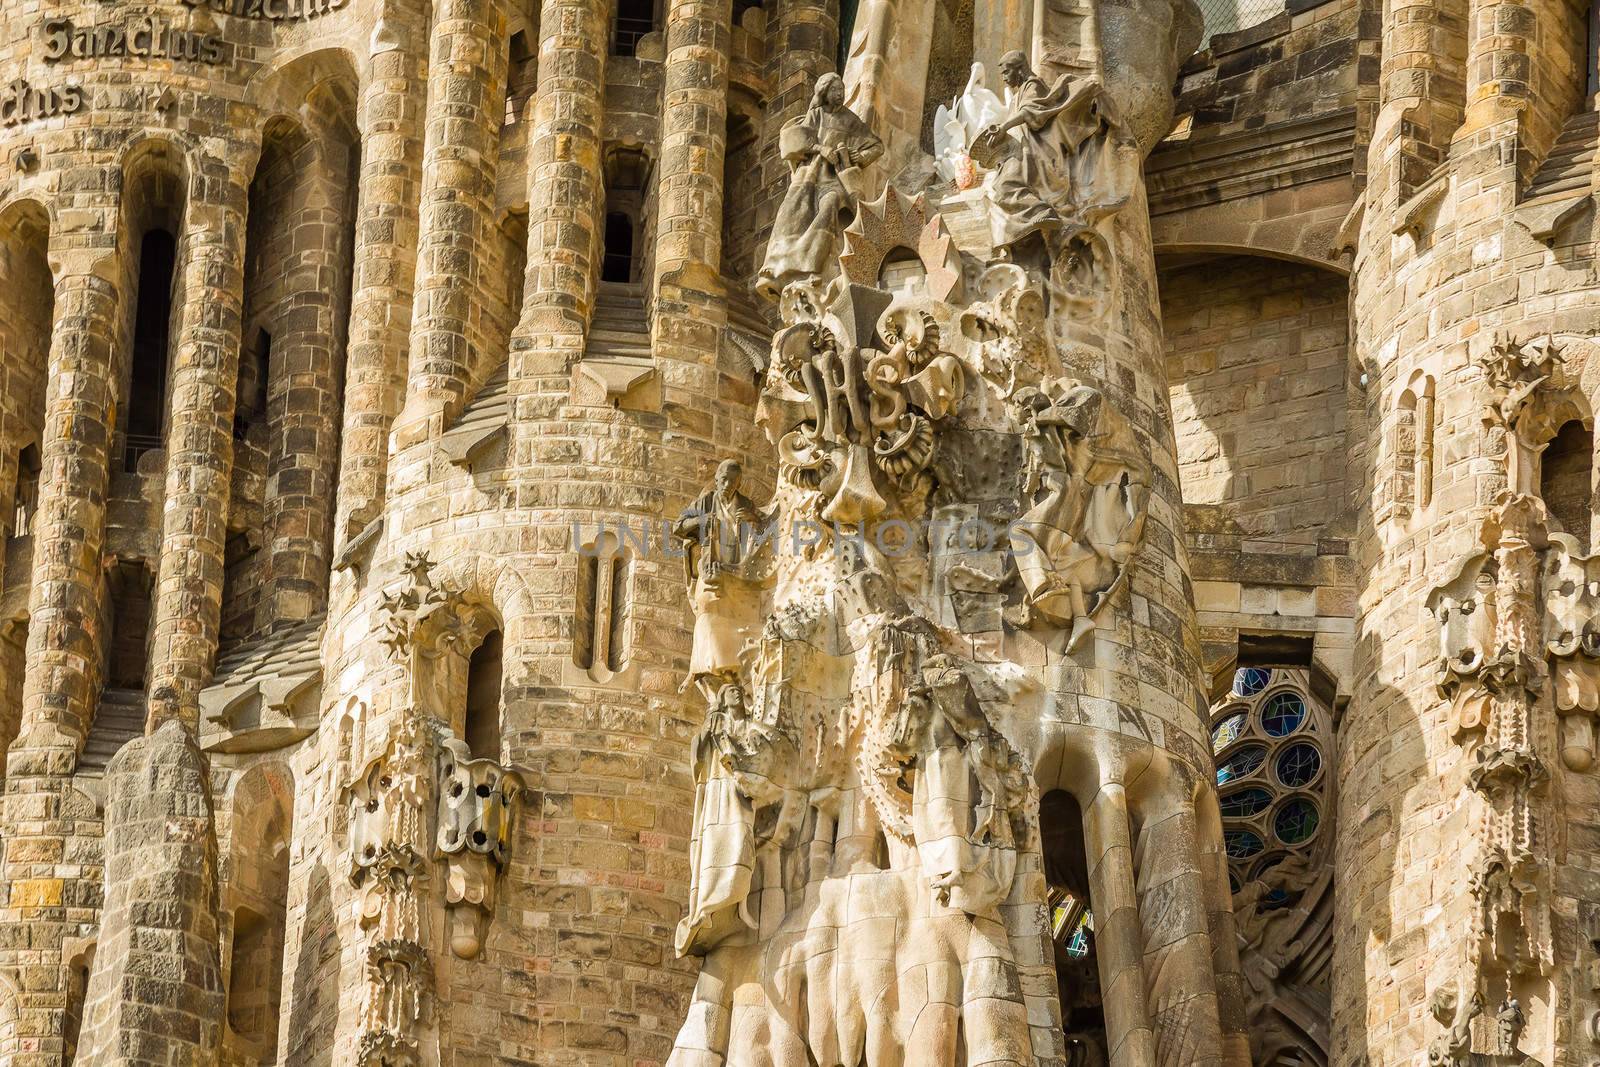 Architecture detail of the Sagrada Familia cathedral, designed by Antoni Gaudi, in Barcelona, Spain